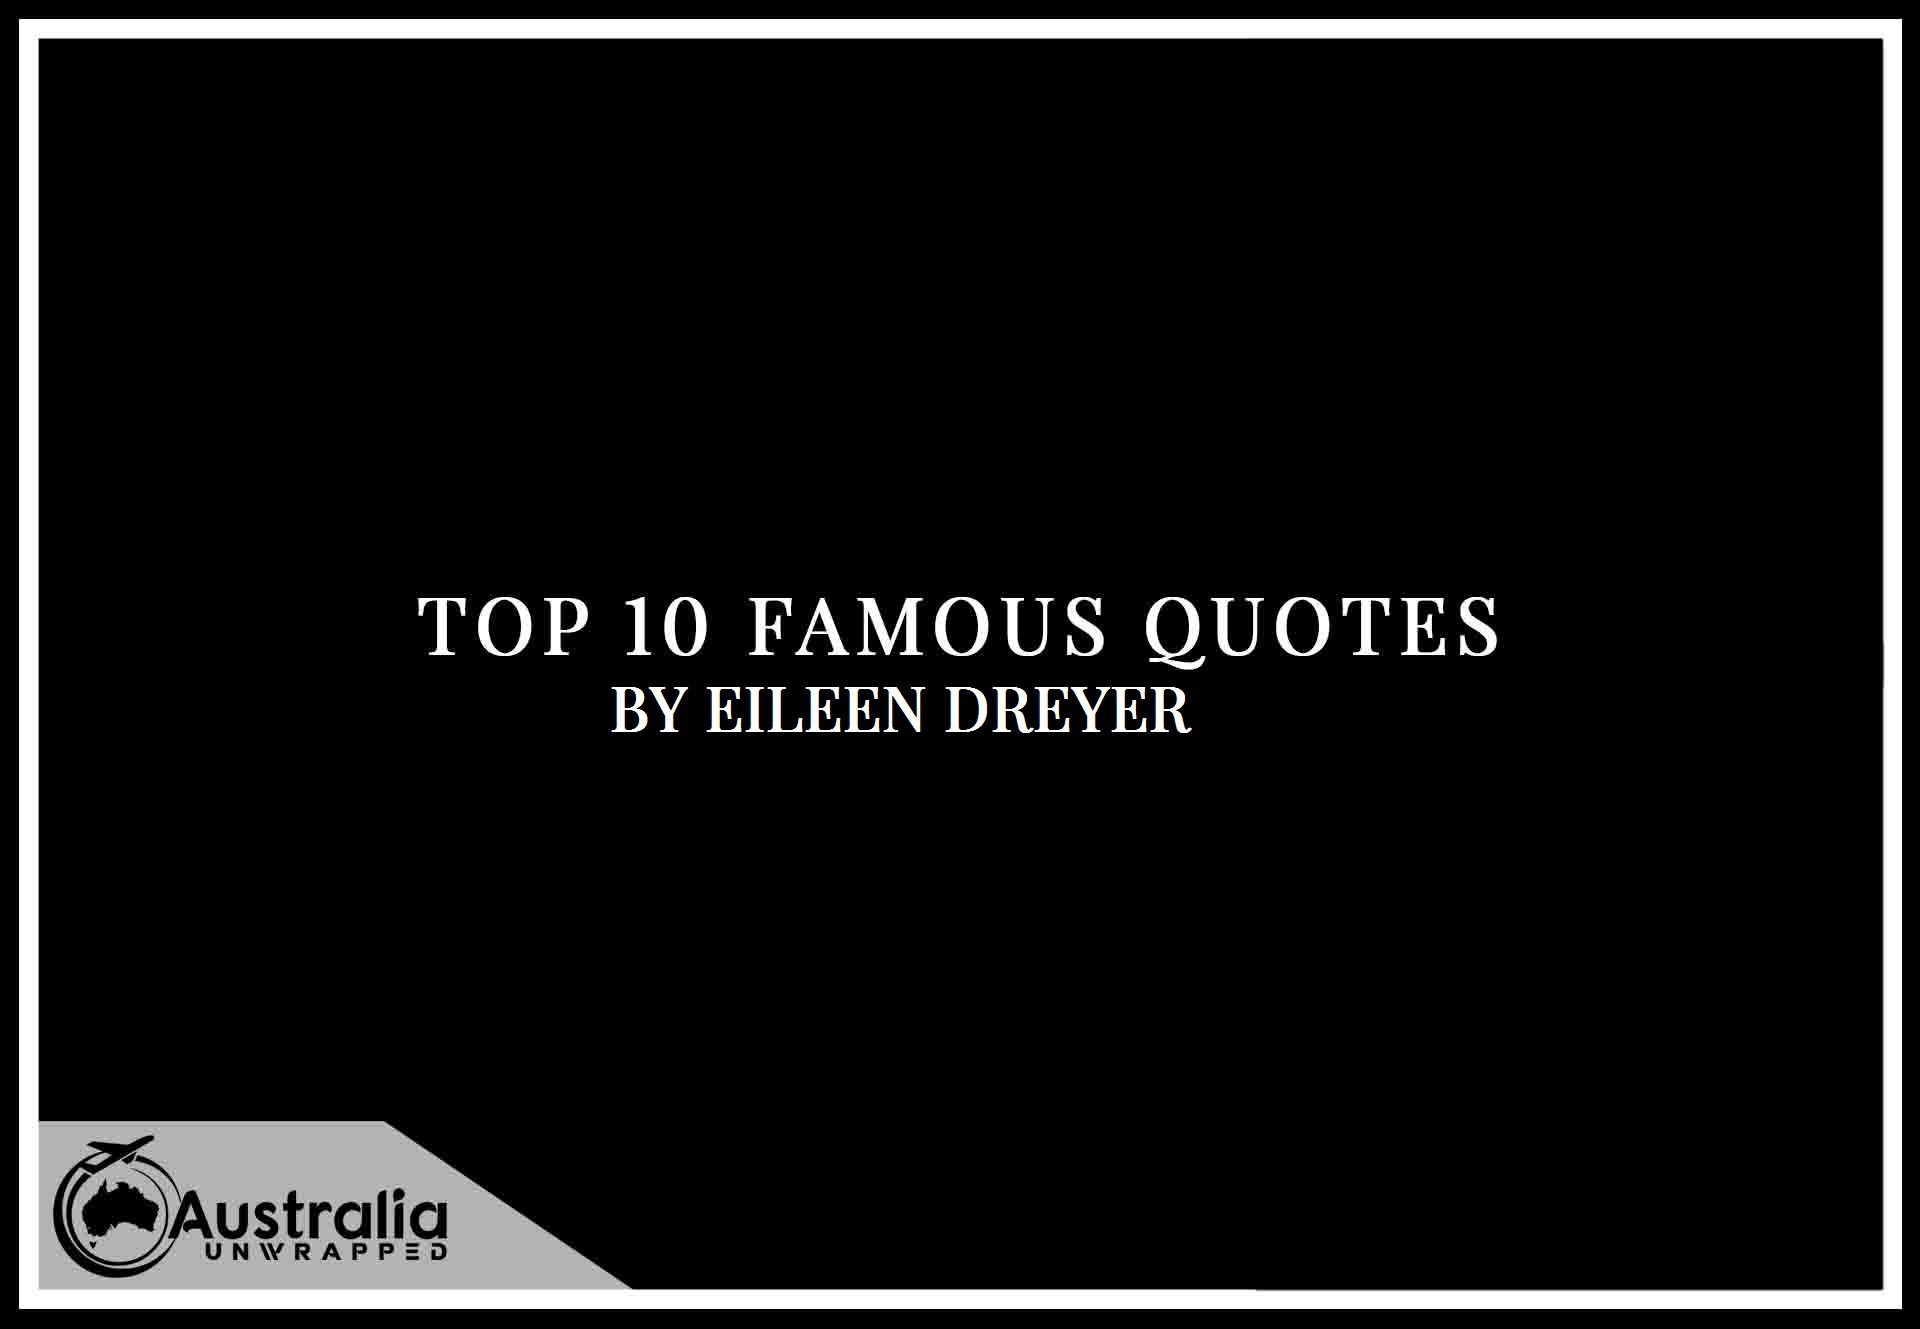 Eileen Dreyer’s Top 10 Popular and Famous Quotes